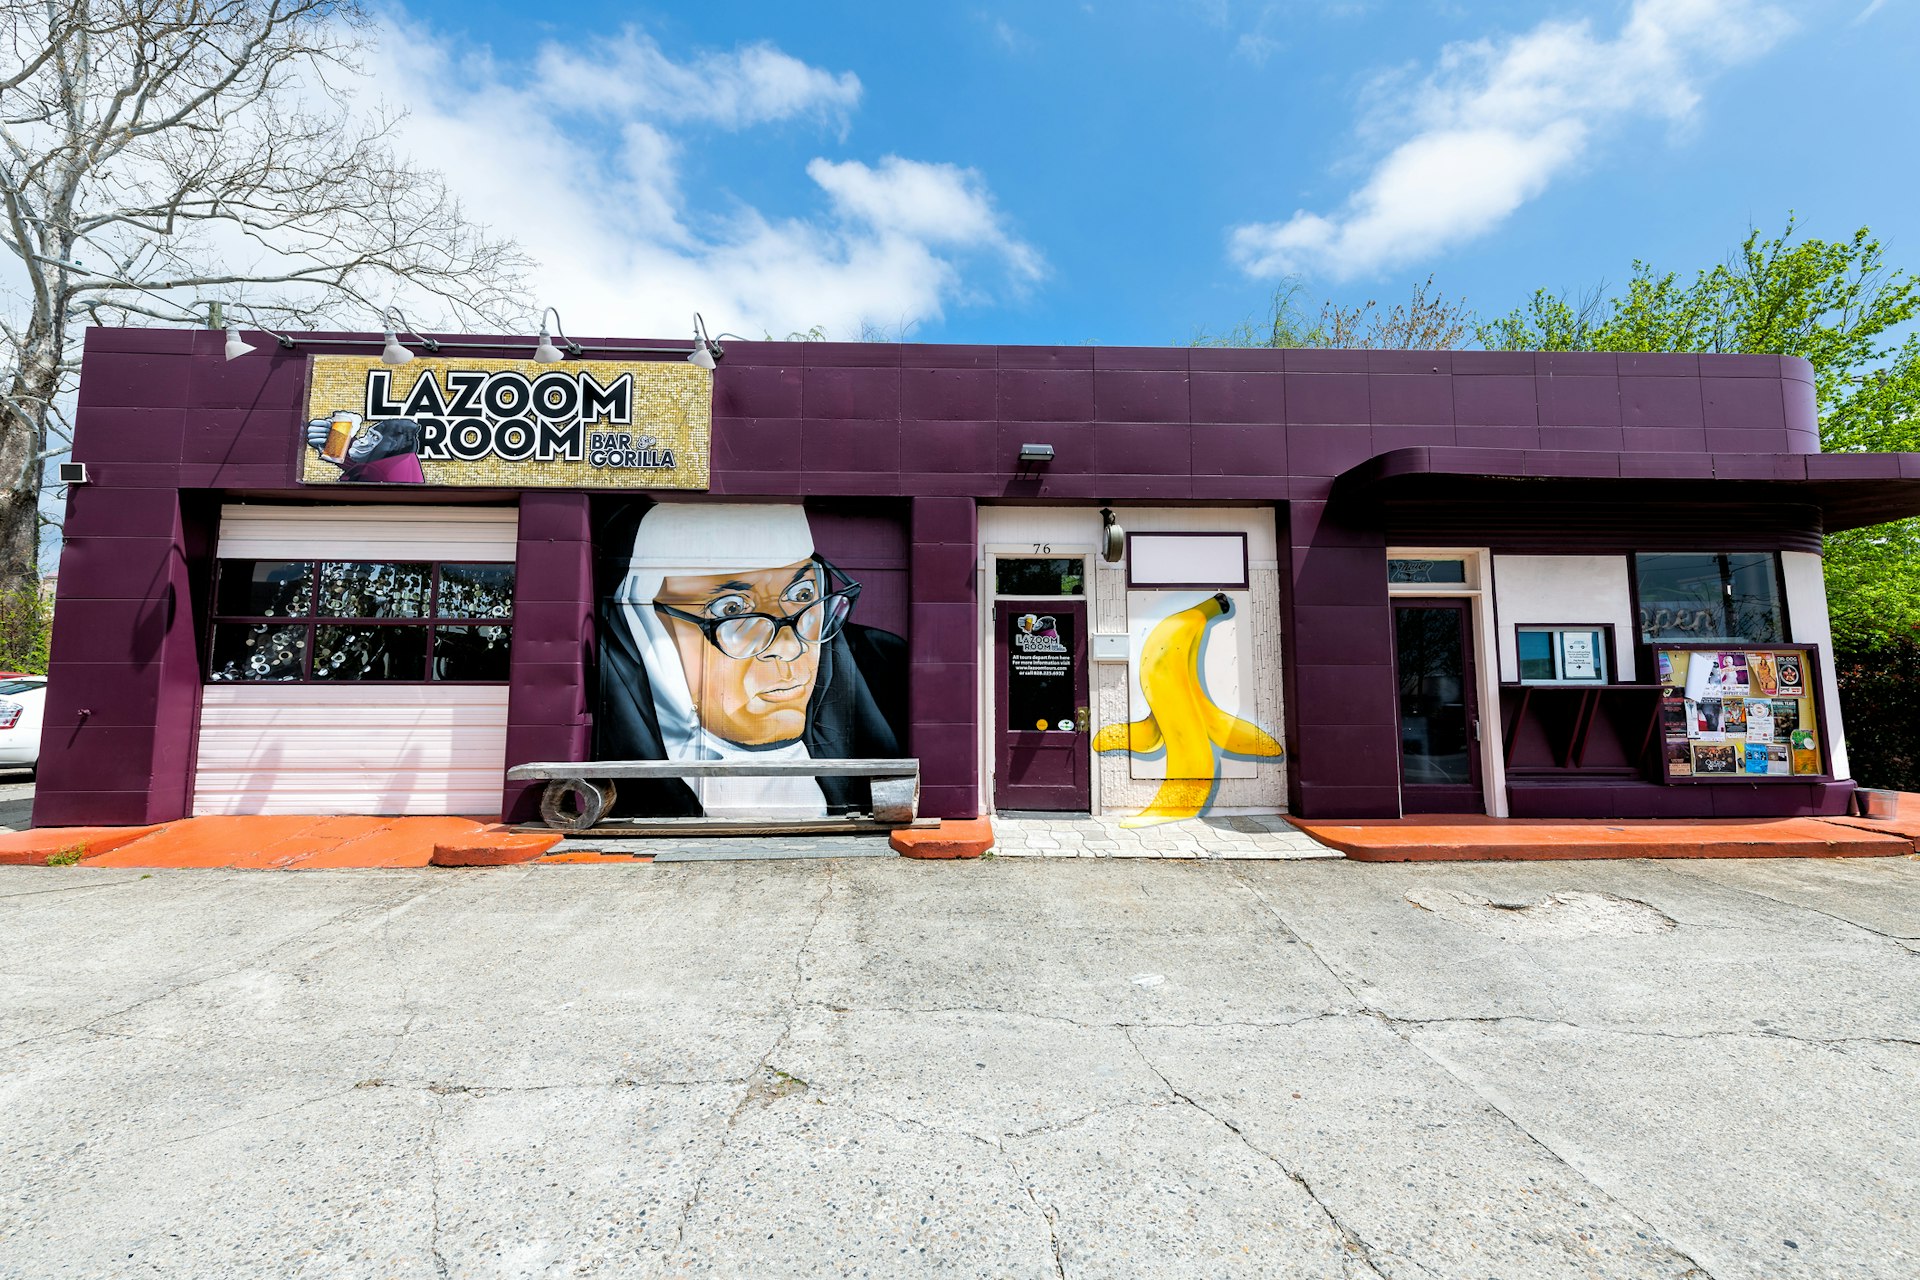 LaZoom room bar gorilla restaurant serving local beer, food with comedy tour in Asheville